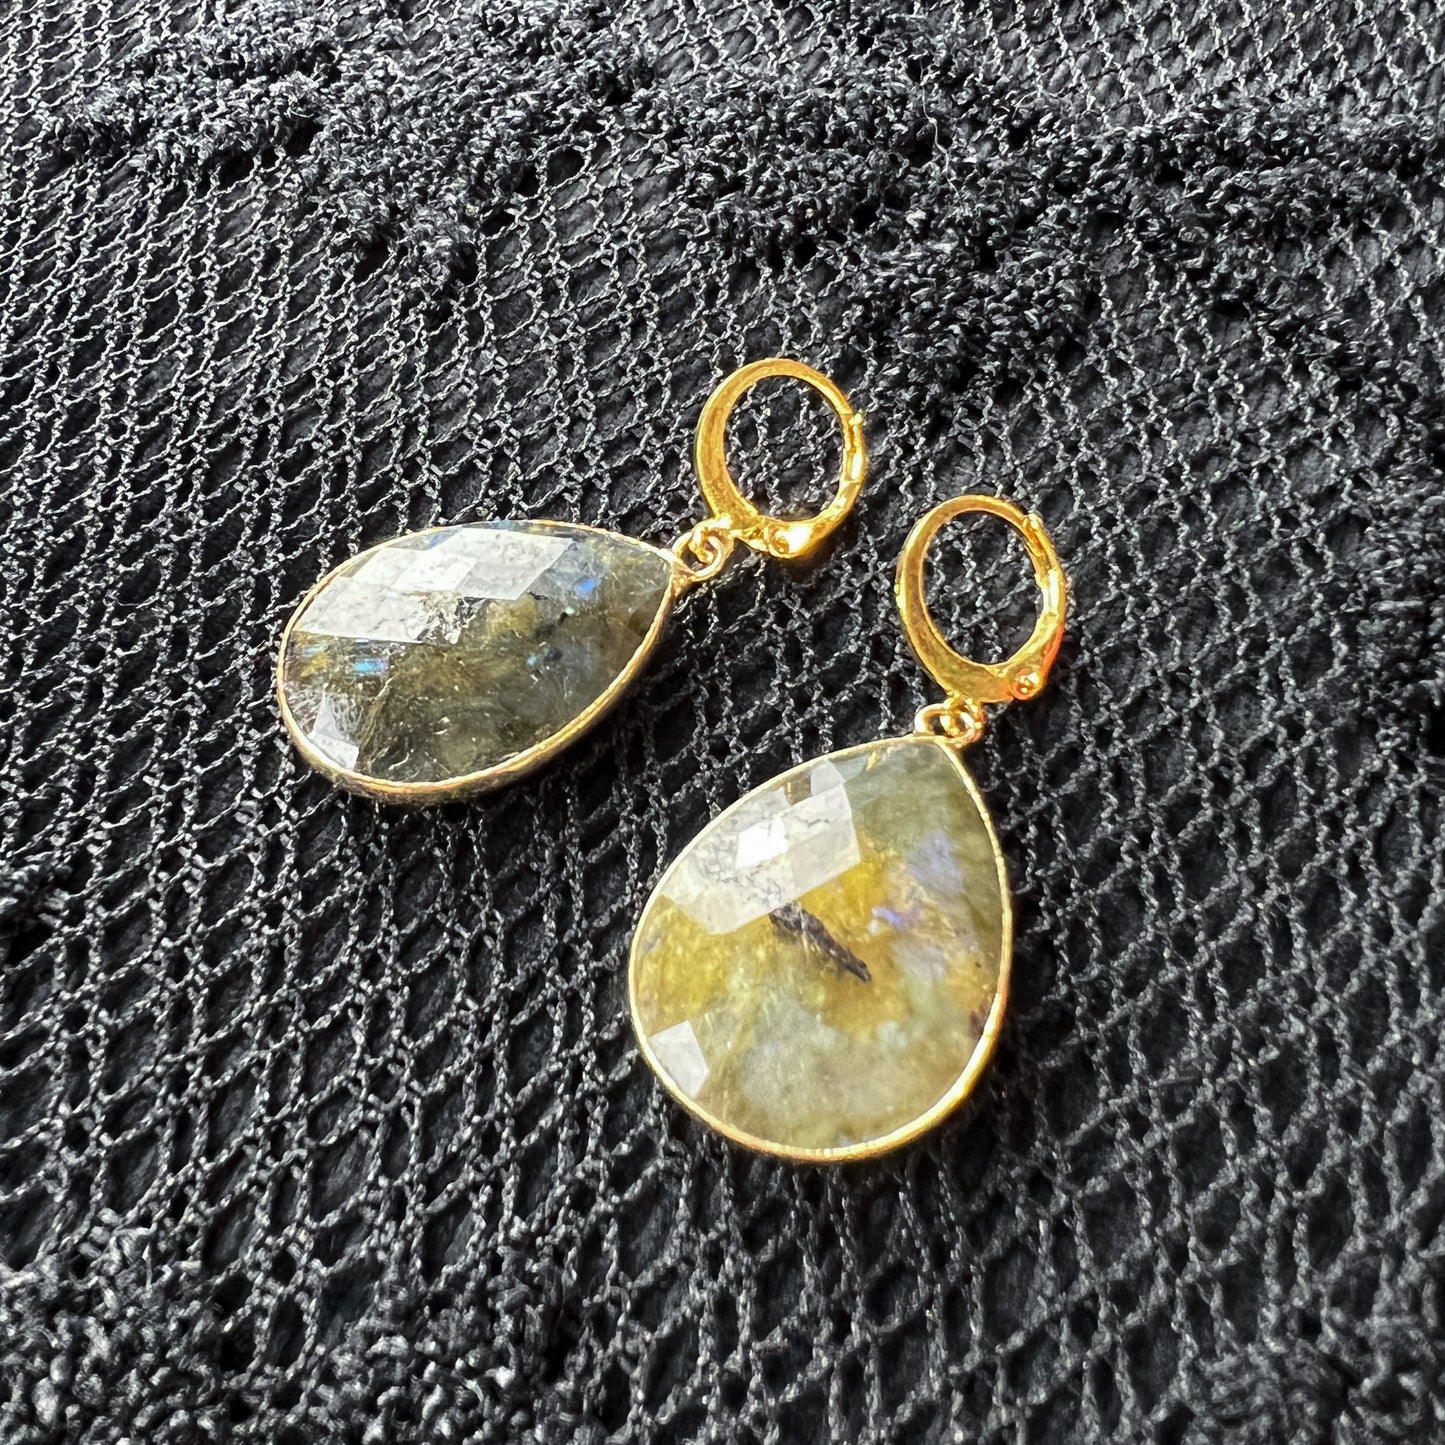 Faceted Labradorite gemstone golden earrings - The French Witch shop